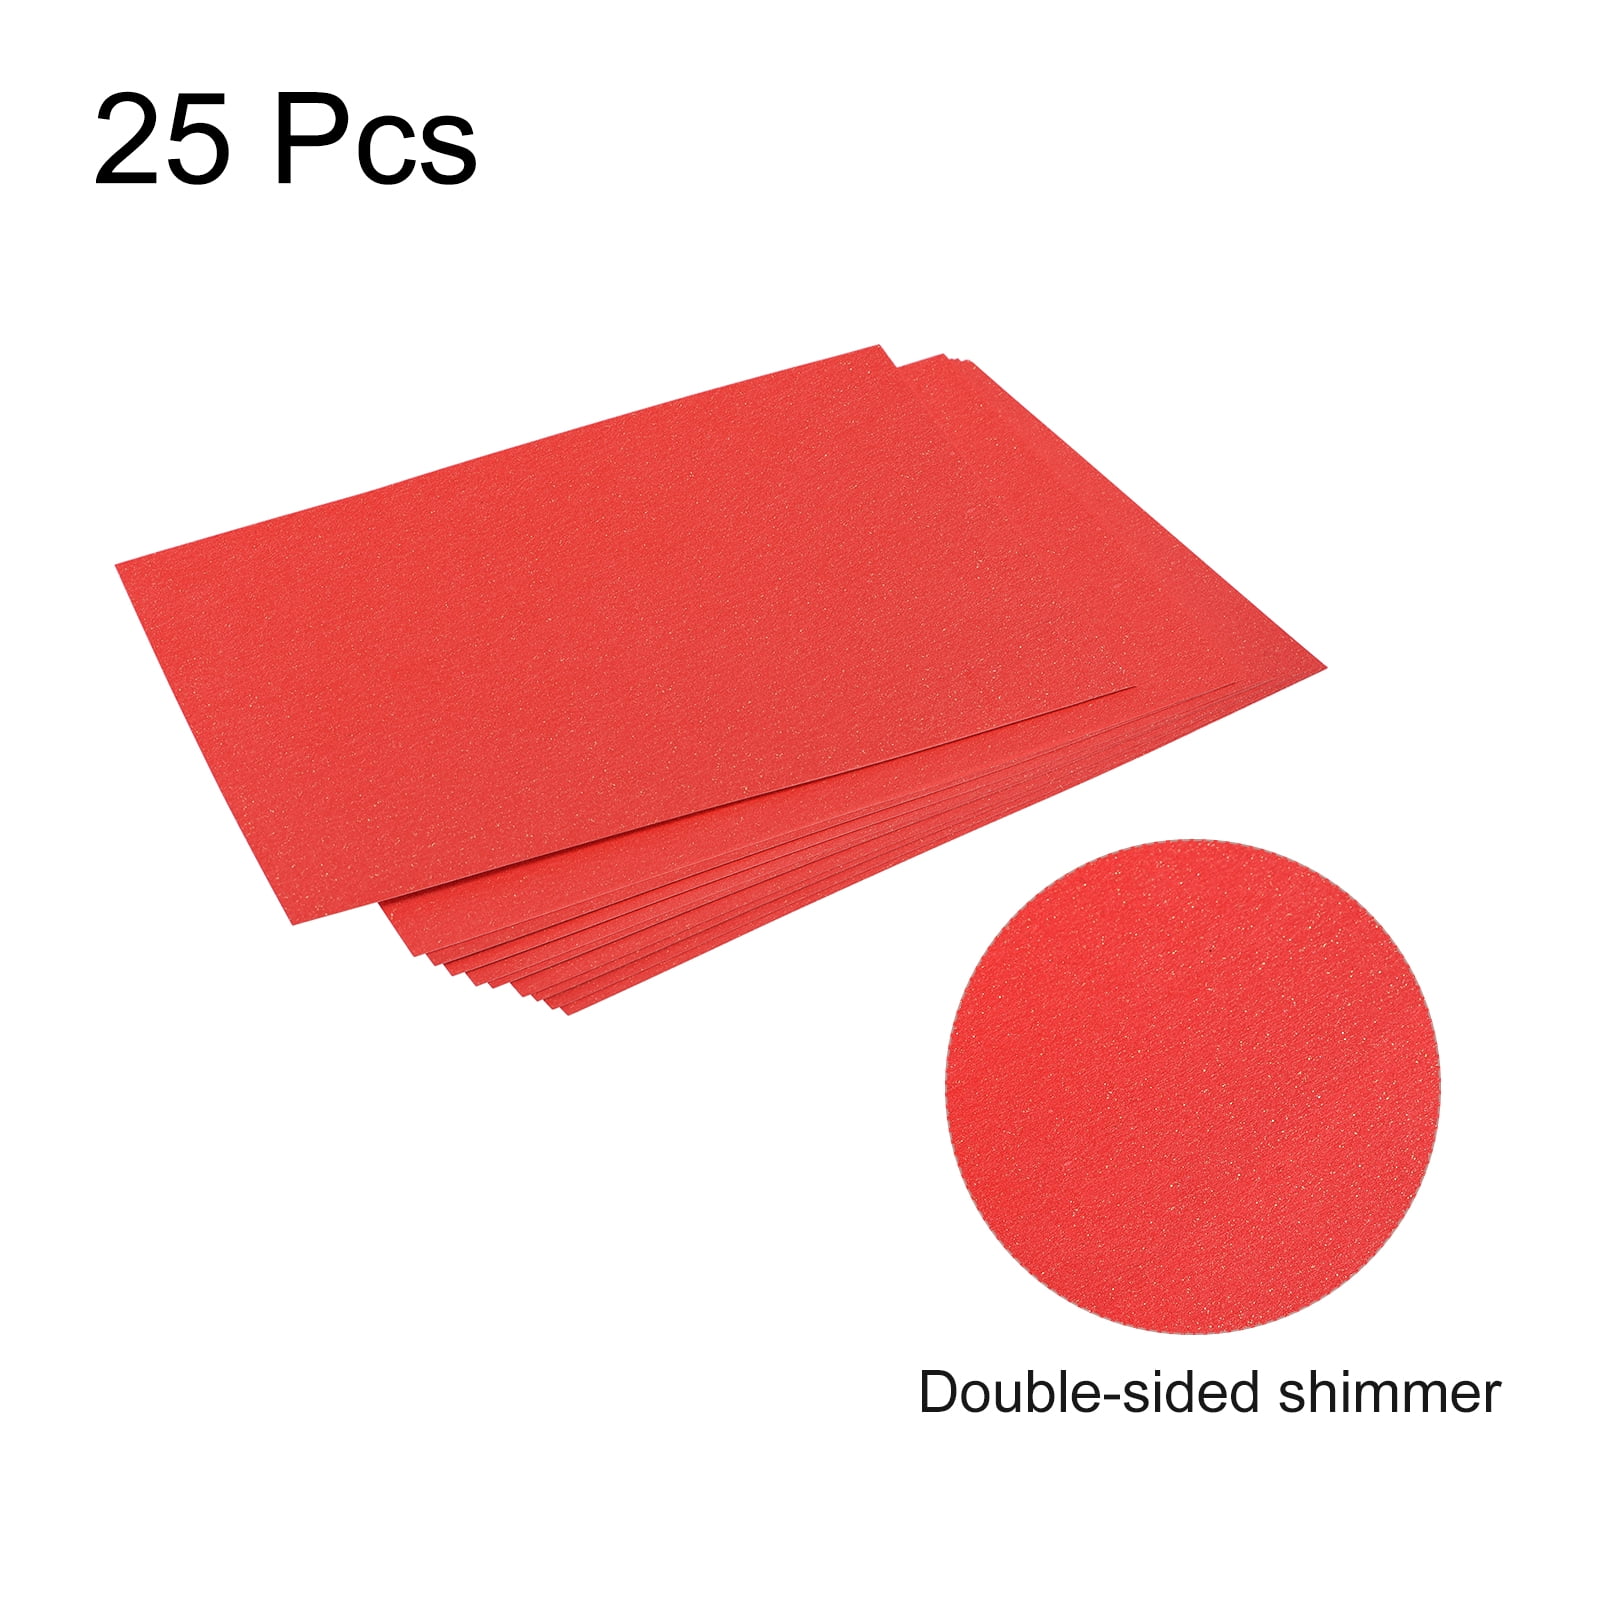 36 Sheets Red Shimmer Cardstock, 8.5 x 11 Metallic Cardstock Paper,  250gsm/92lb Cover, Double Sided Pearlescent Paper Card Stock for  Invitations